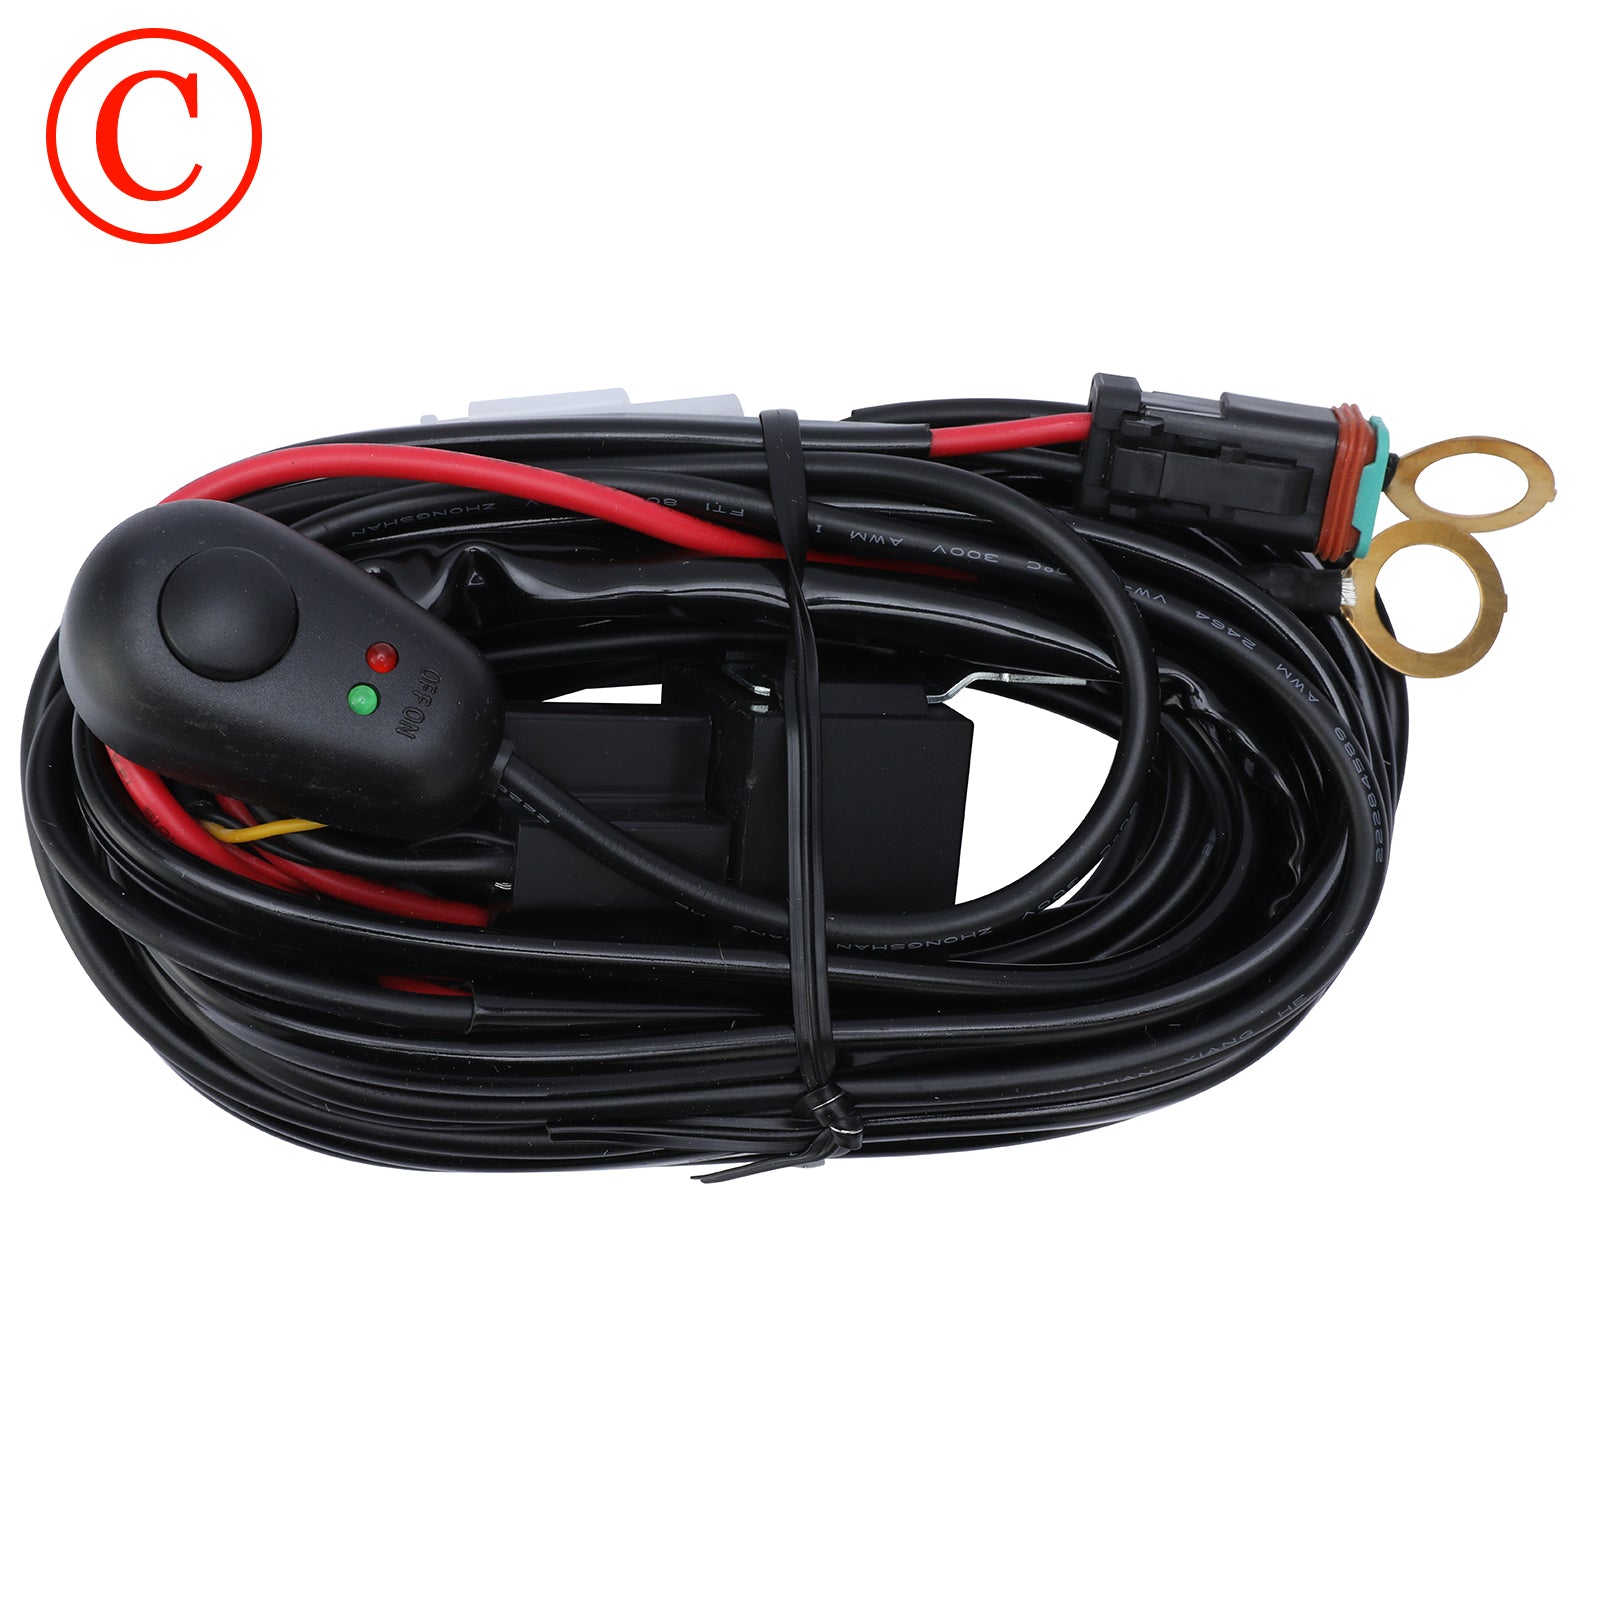 LED light Wire Group for head lights and fog lights Light Bar OPENROAD C  